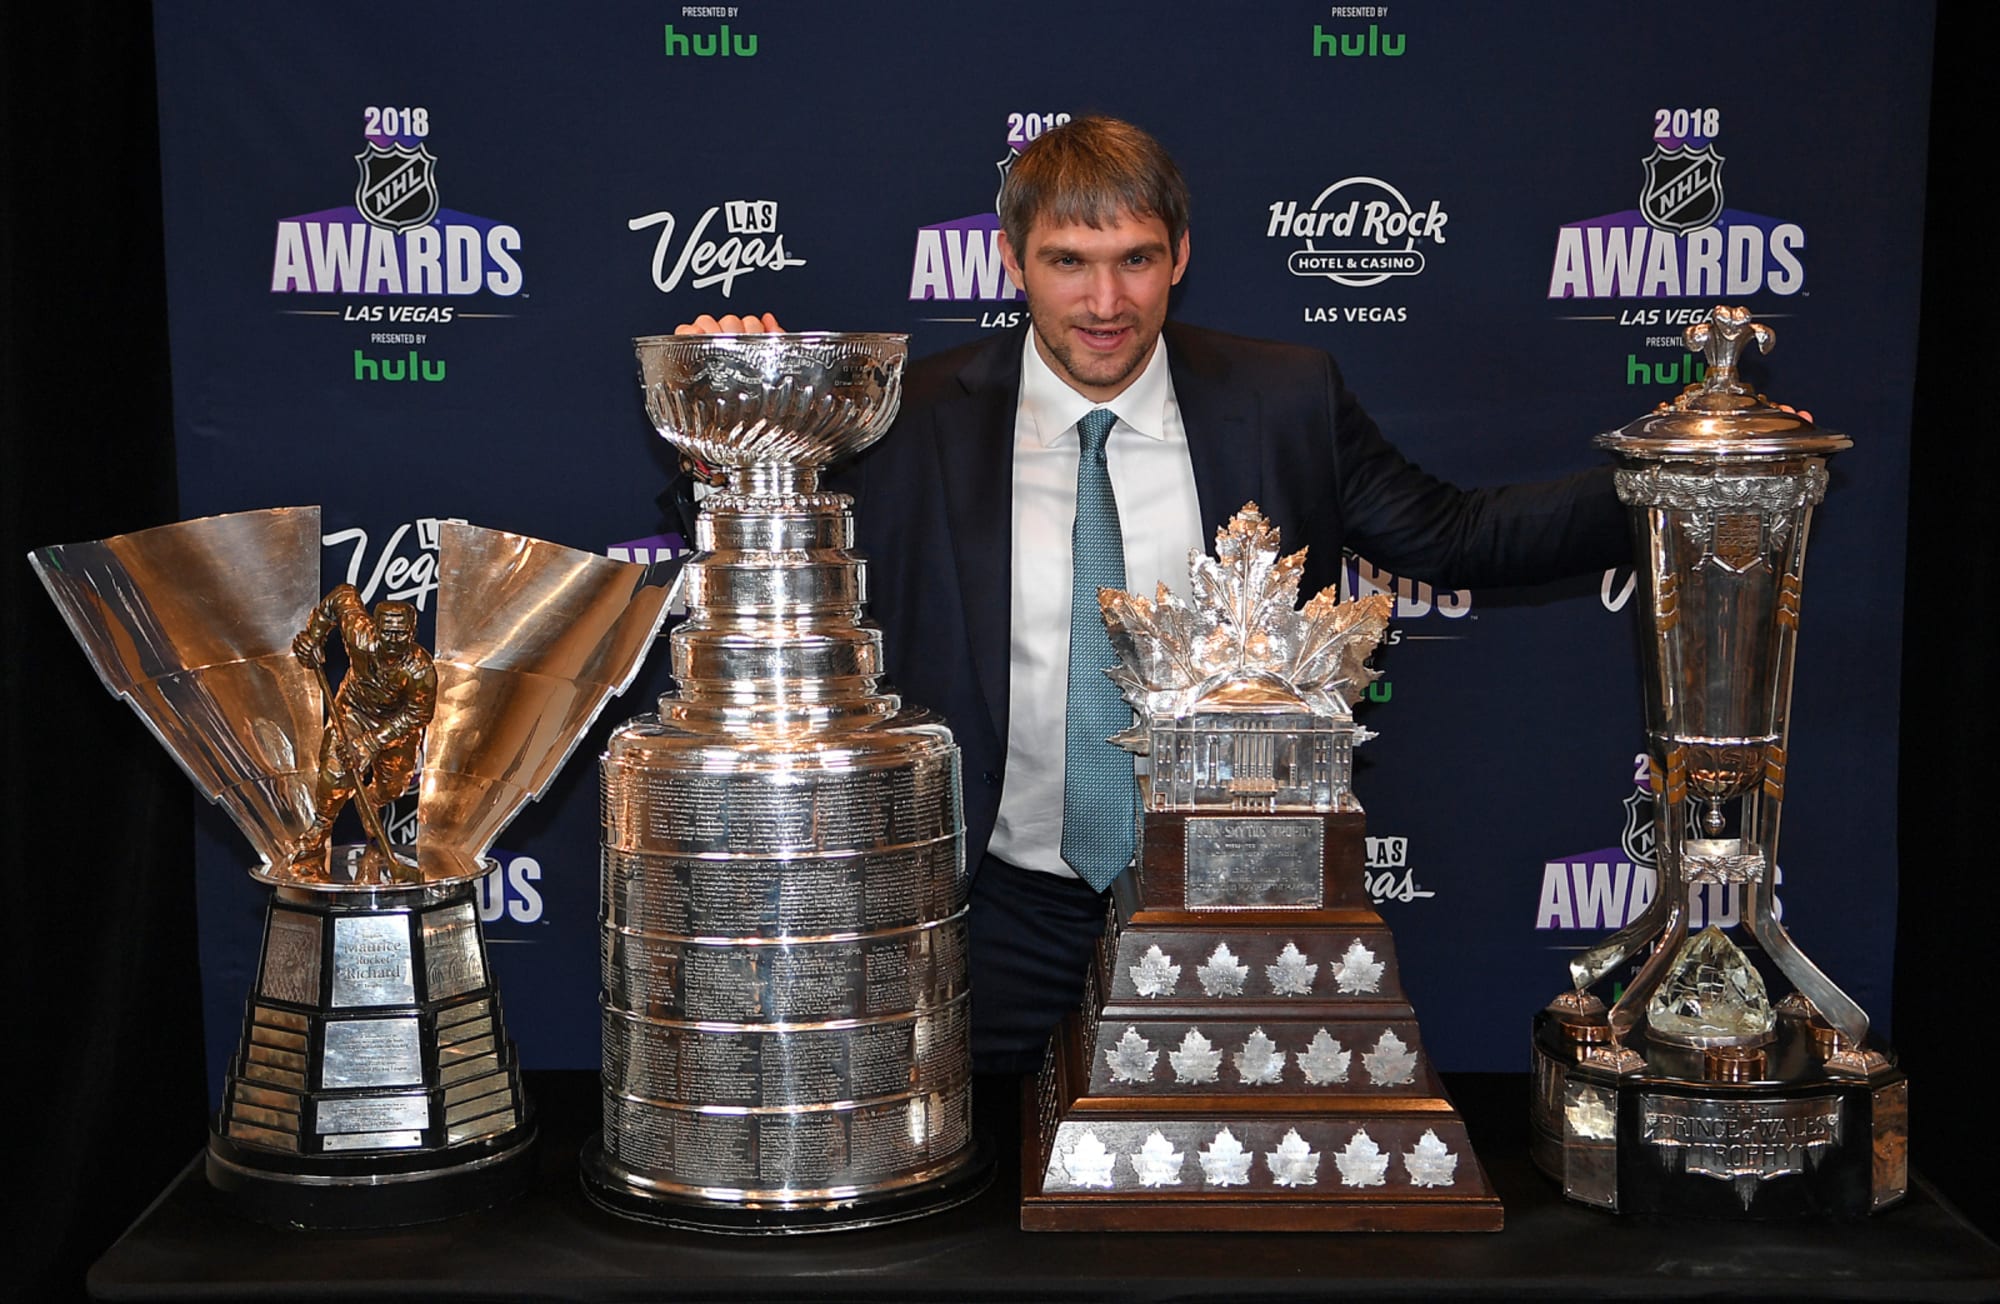 202122 NHL Season Award Predictions from Stanley Cup to Jack Adams